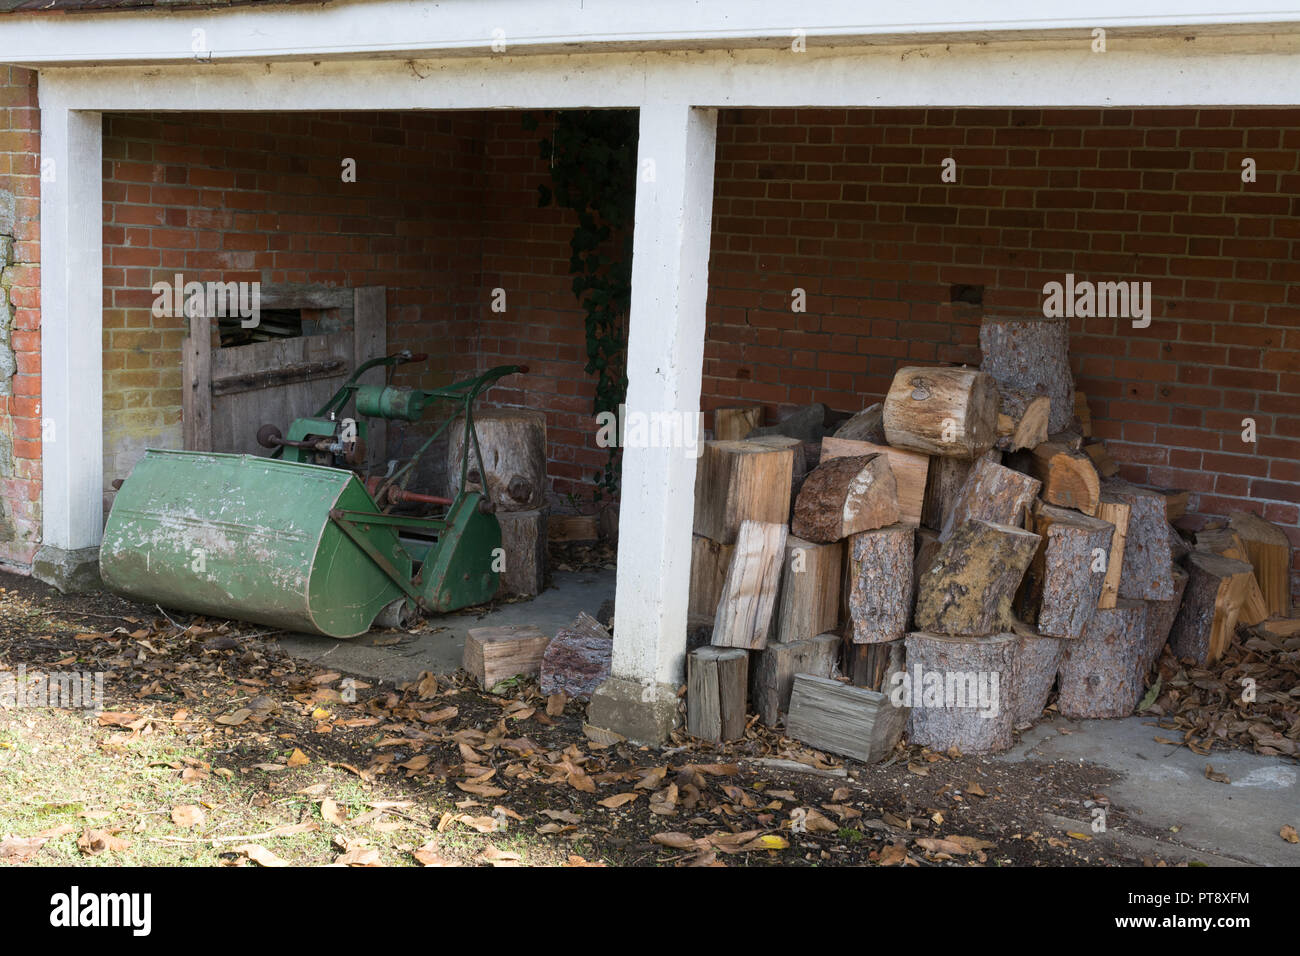 Outhouse (outbuilding, out-building) used for storage of logs and an old lawnmower (lawn mower) Stock Photo